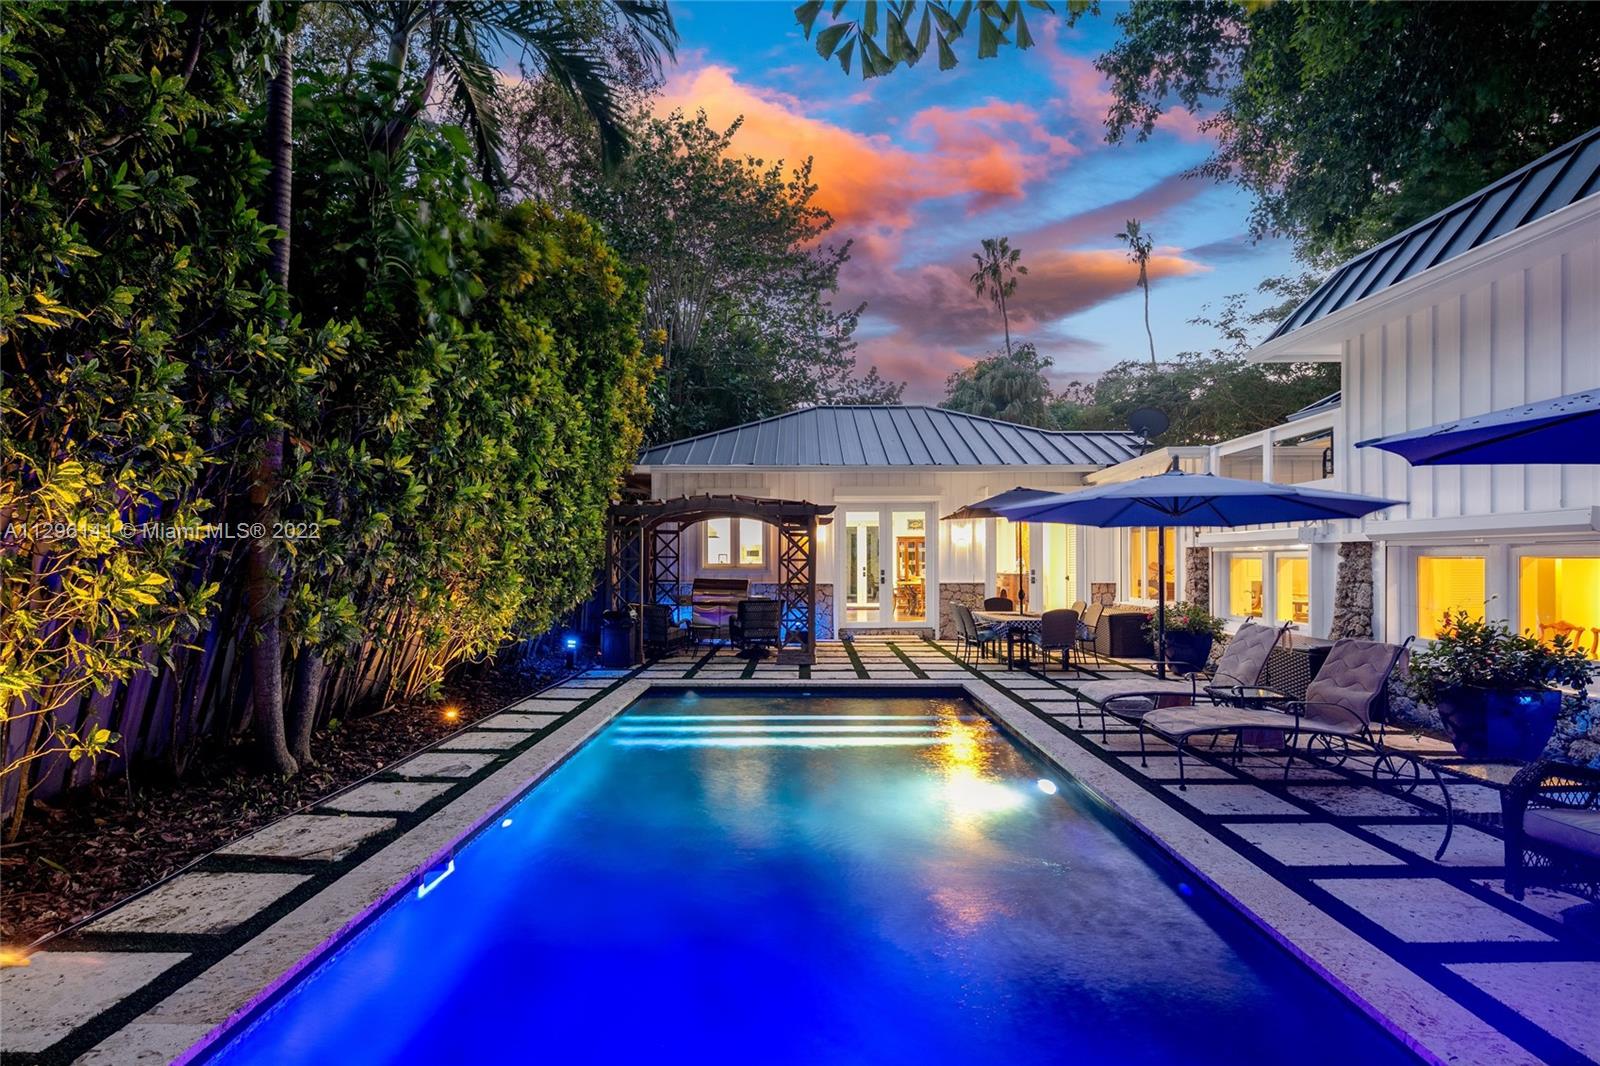 Nestled away in the heart of Coconut Grove, this spectacular and unique tropical oasis is surrounded by the most captivating landscaping, including a 150 year old Banyan Tree offering the most serene private escape for your family. Completely renovated in 2012, this home has it al! Including a gourmet kitchen, Viking + SubZero appliances, home office, large wine cellar, full house generator, propane tank, 2 septic tanks, spacious master suite with spa bath + large walk-in closet, impact windows/doors, fireplace and more. The scenic landscaping is paired with a resort-style pool and backyard. Follow the pathway through the trees to a spacious entertaining space and get lost in nature. This home is truly one of a kind!